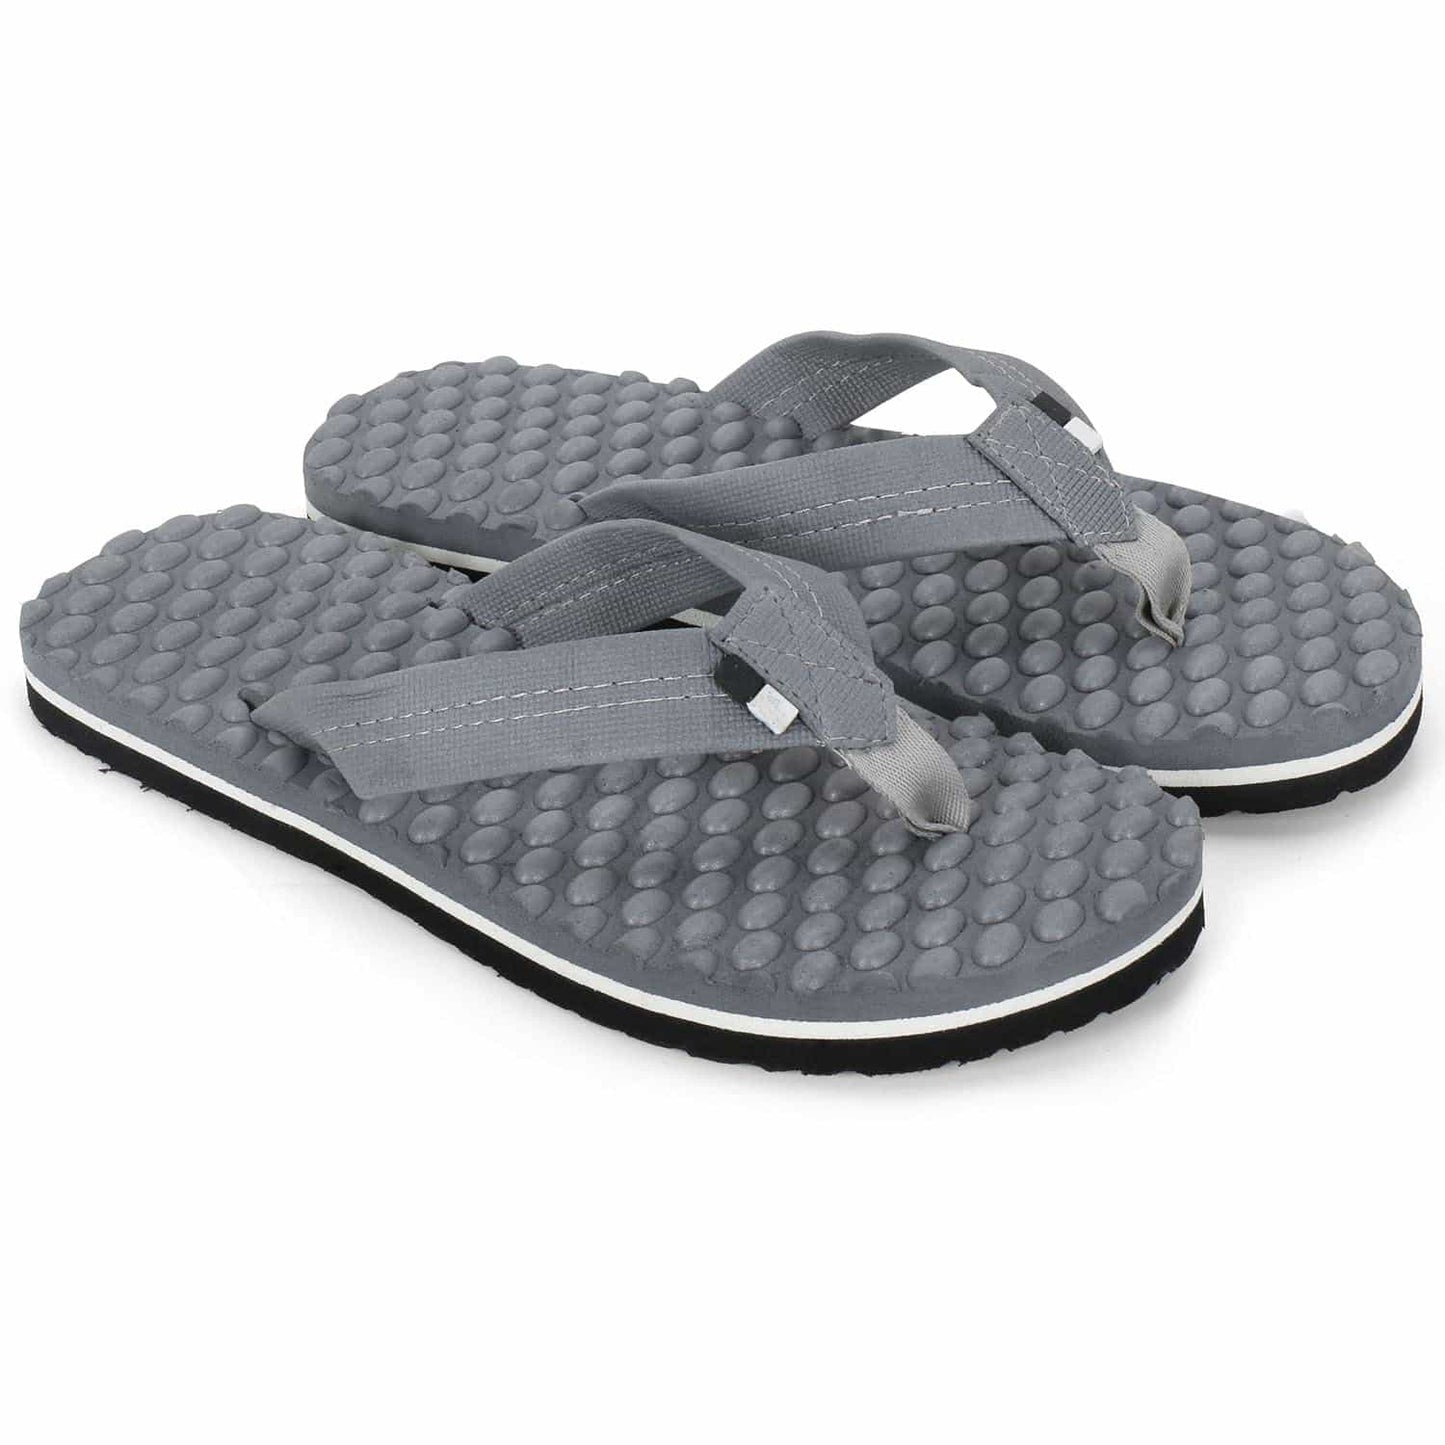 DOCTOR EXTRA SOFT D-30 Bubble  Softy House Slipper for Men's Ortho Car , Flip-Flop Daily Use